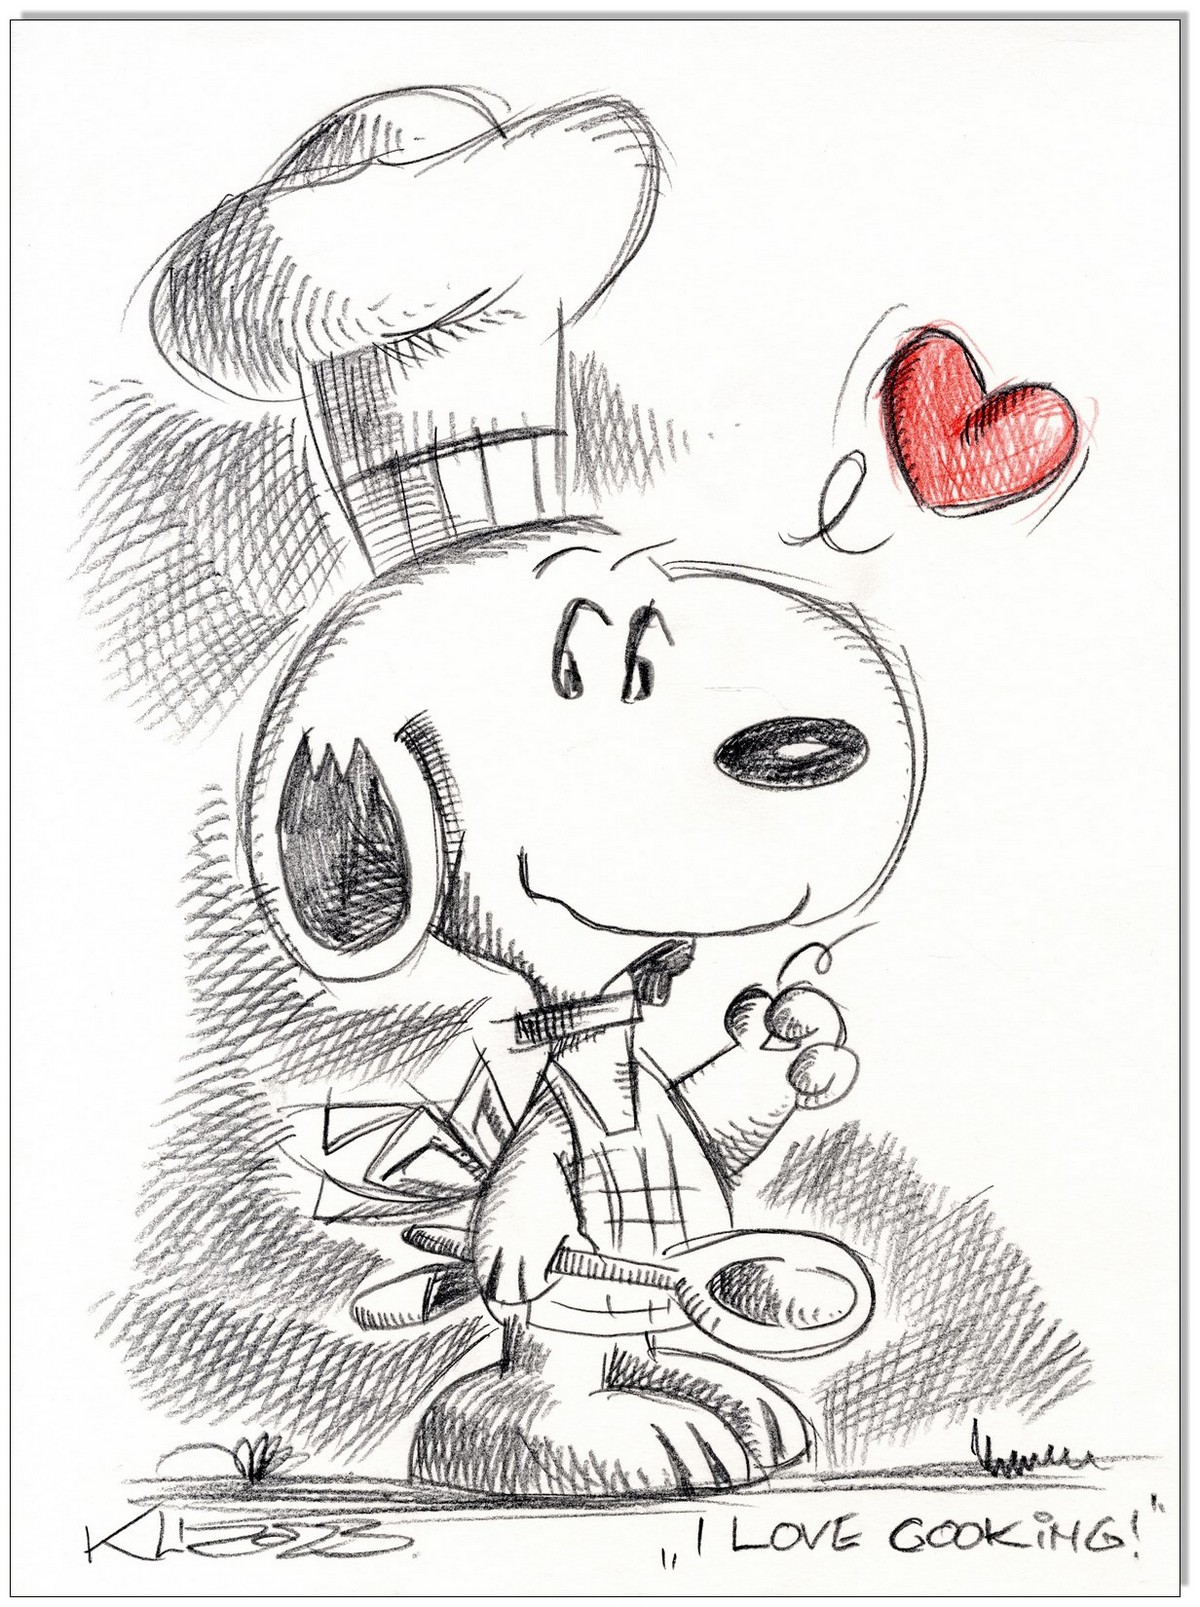 PEANUTS Snoopy I love cooking - 24 x 32 cm